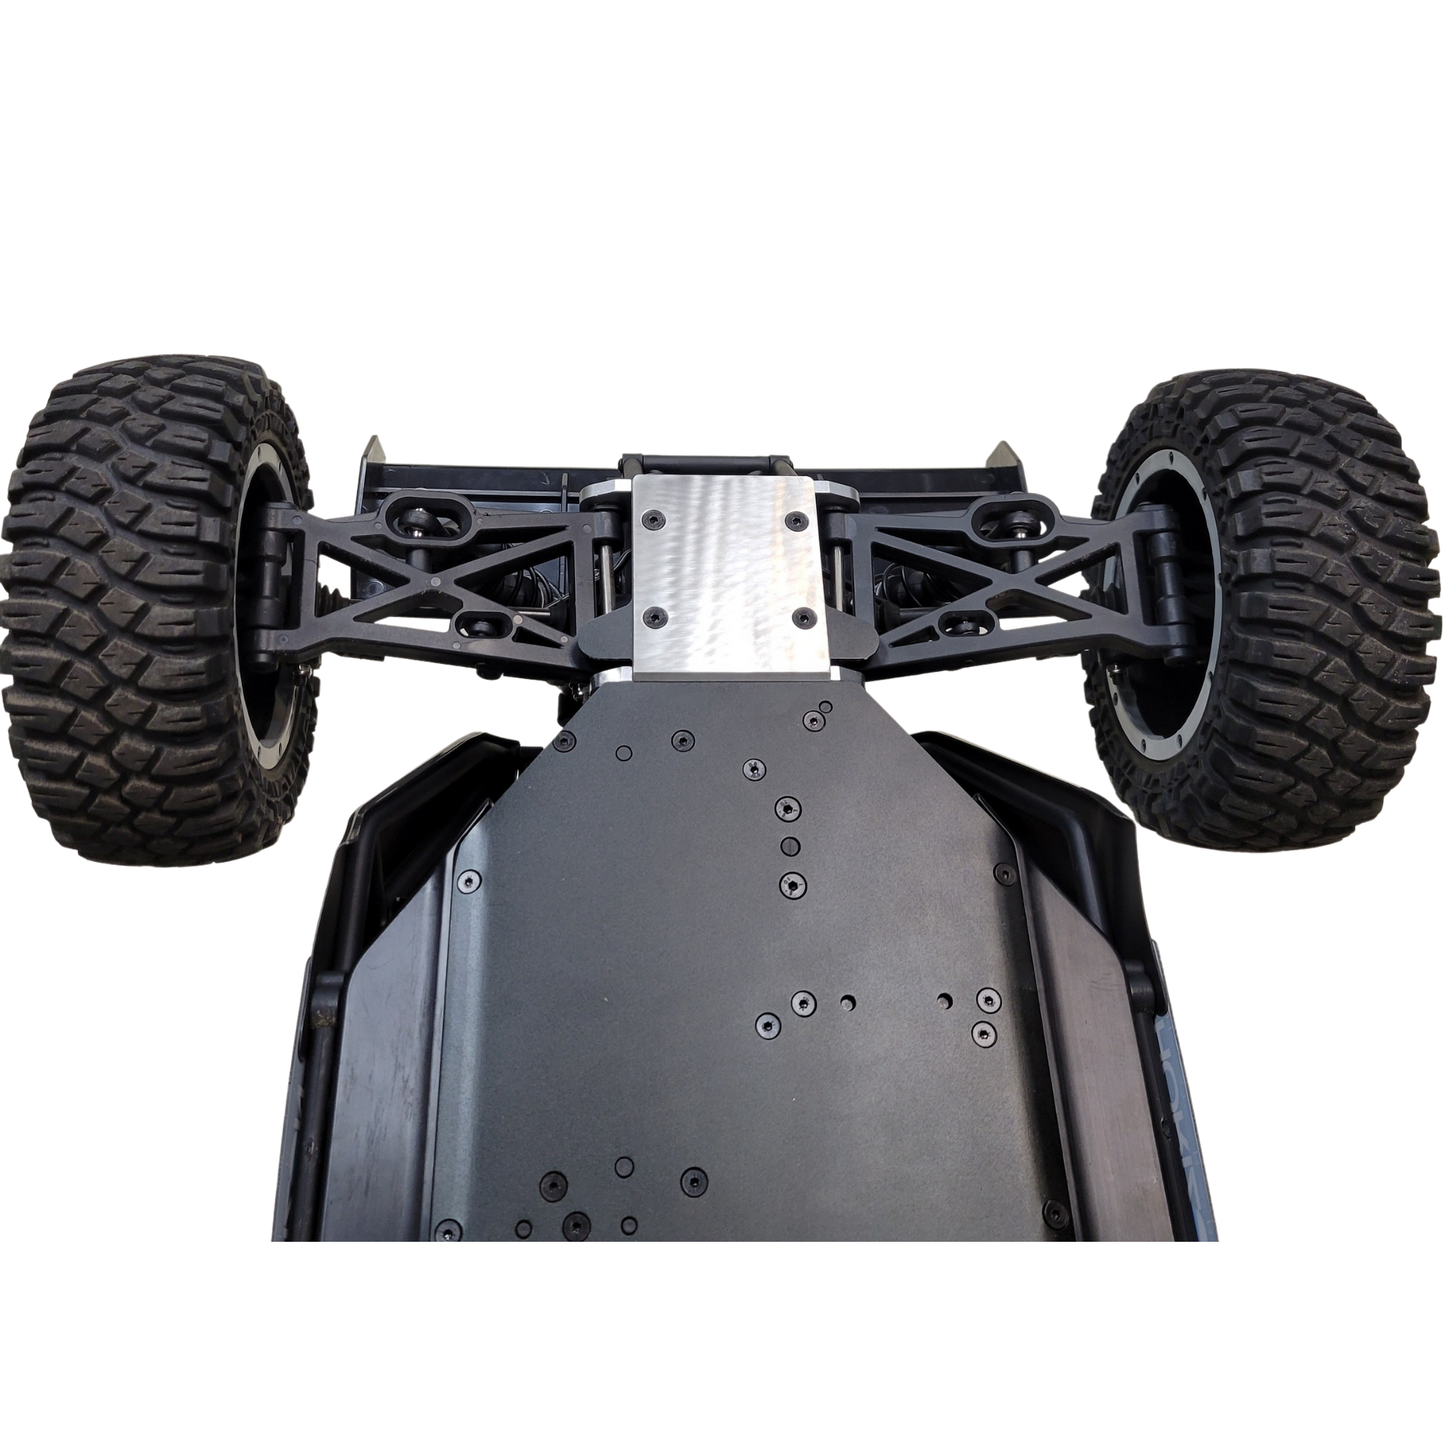 Sumo Racing Rear Skid Plate for Losi DBXLE 1.0 & 2.0